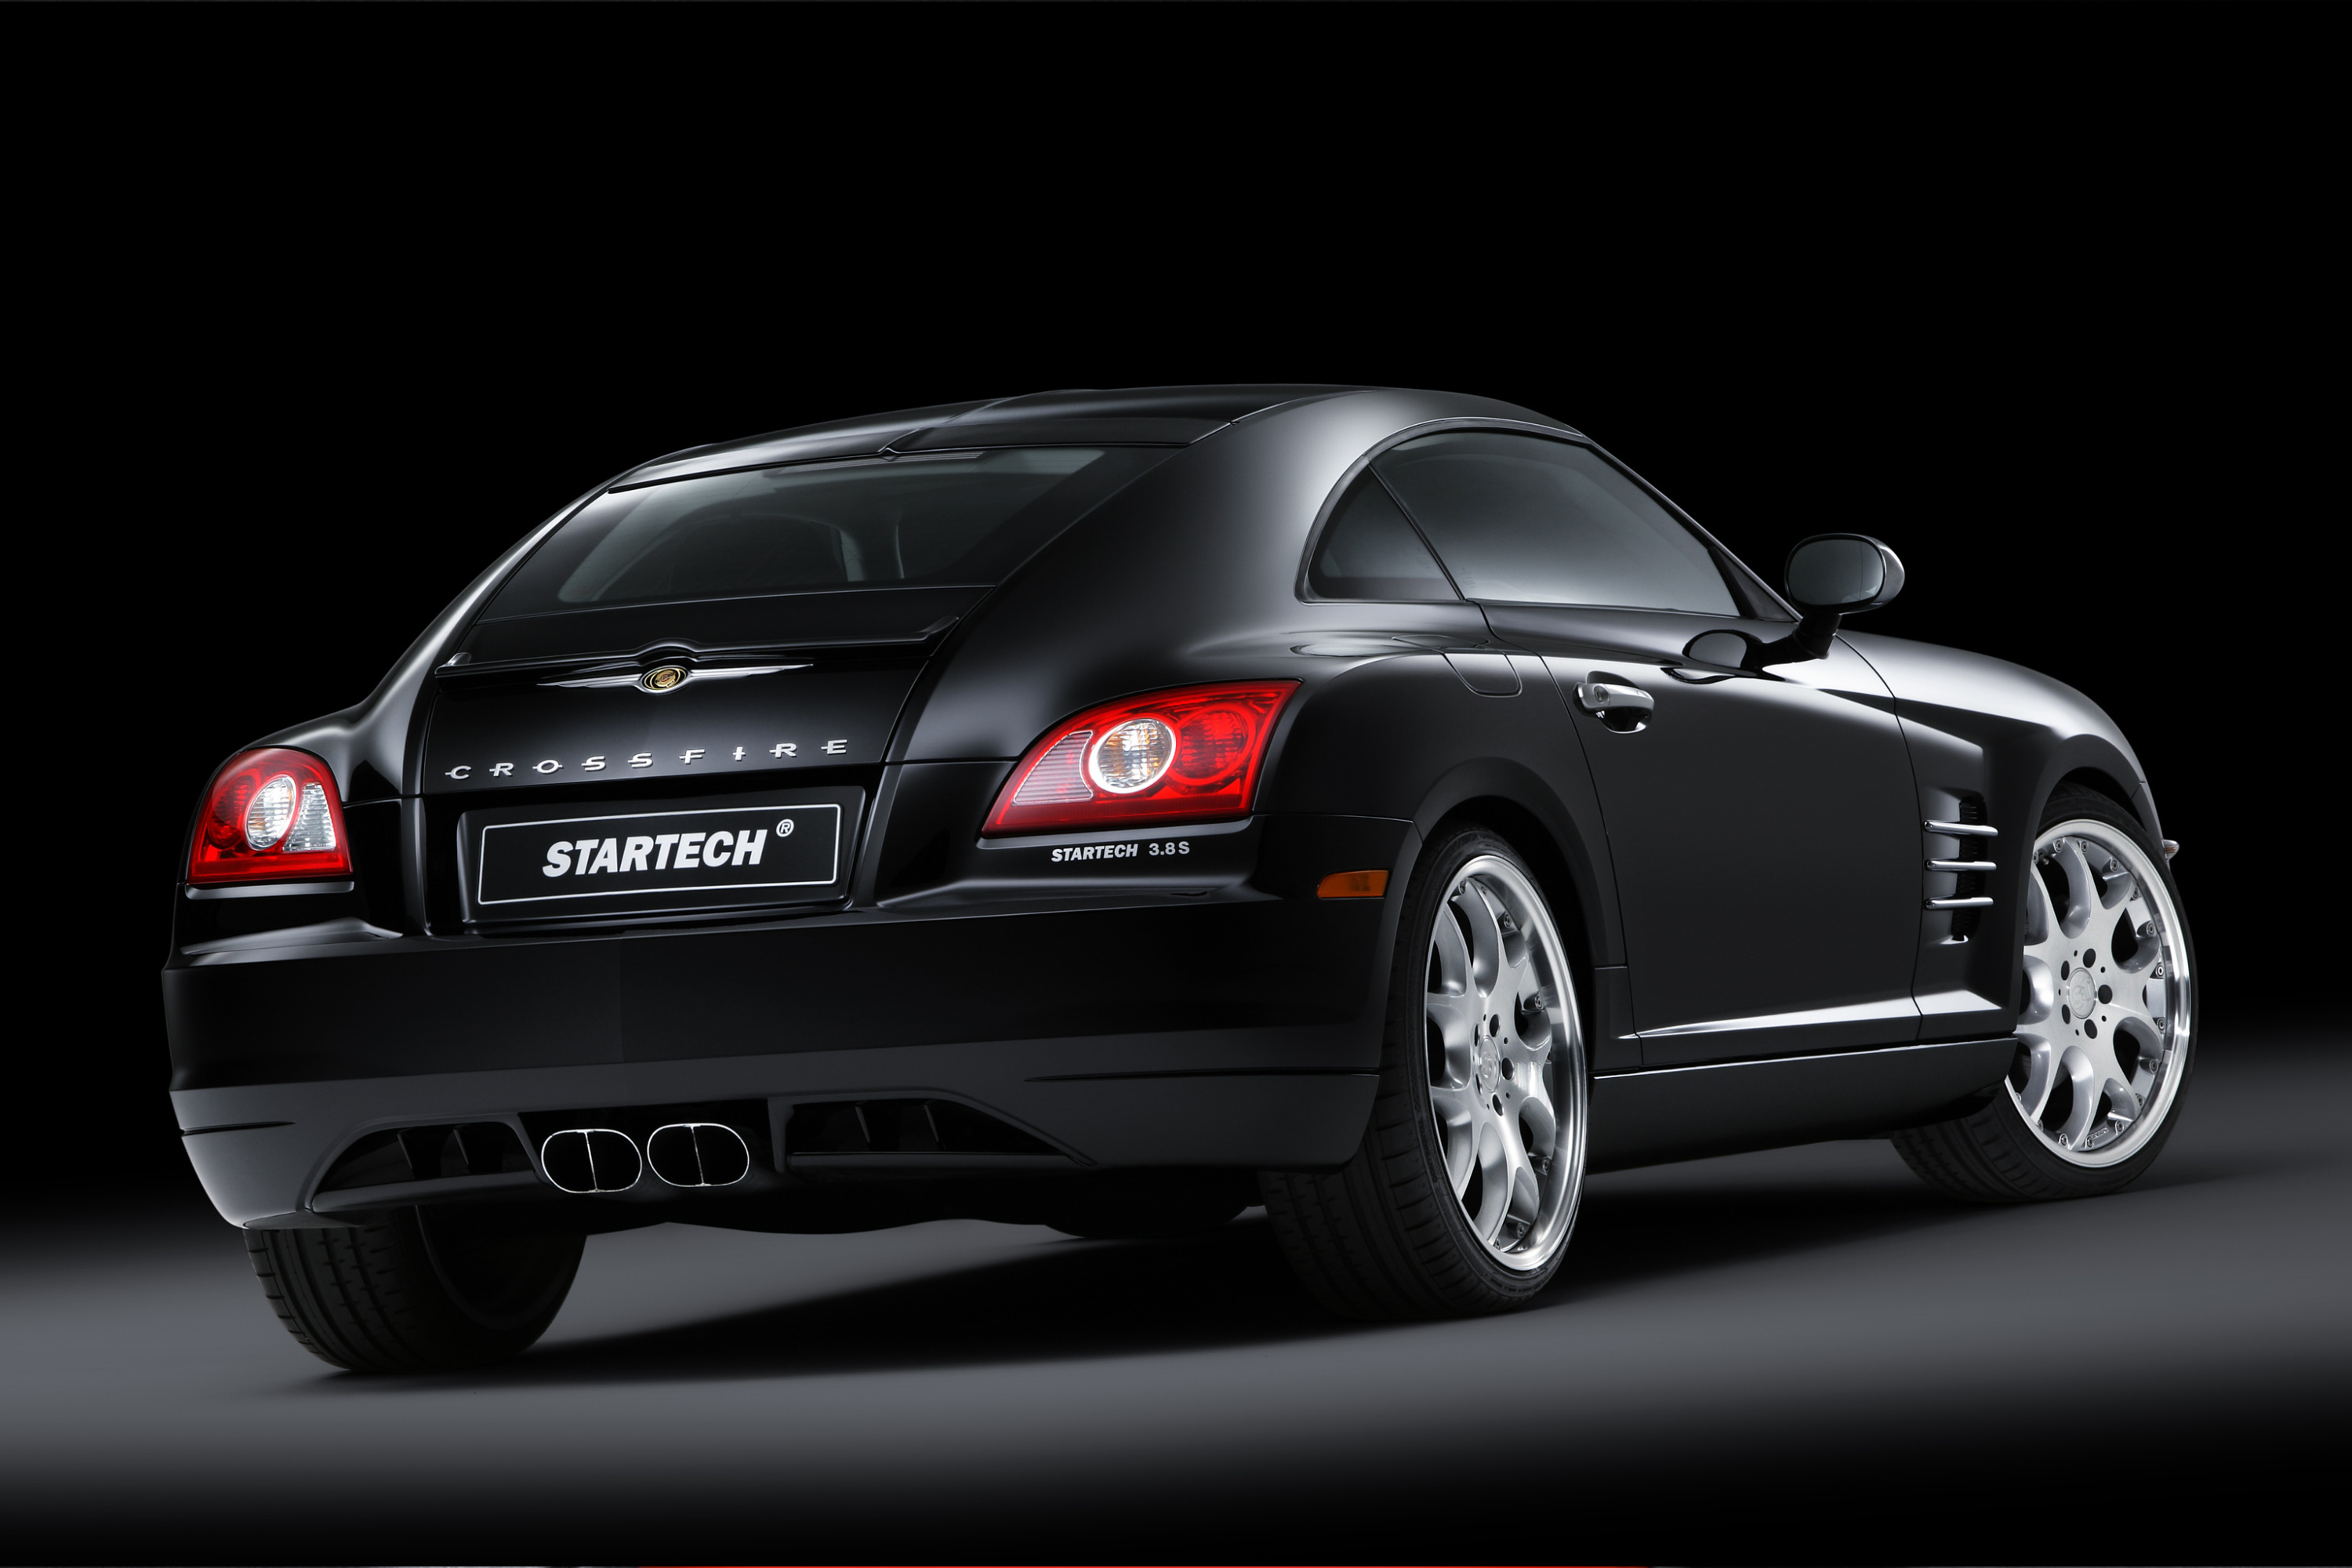 Review of 2005 chrysler crossfire #2